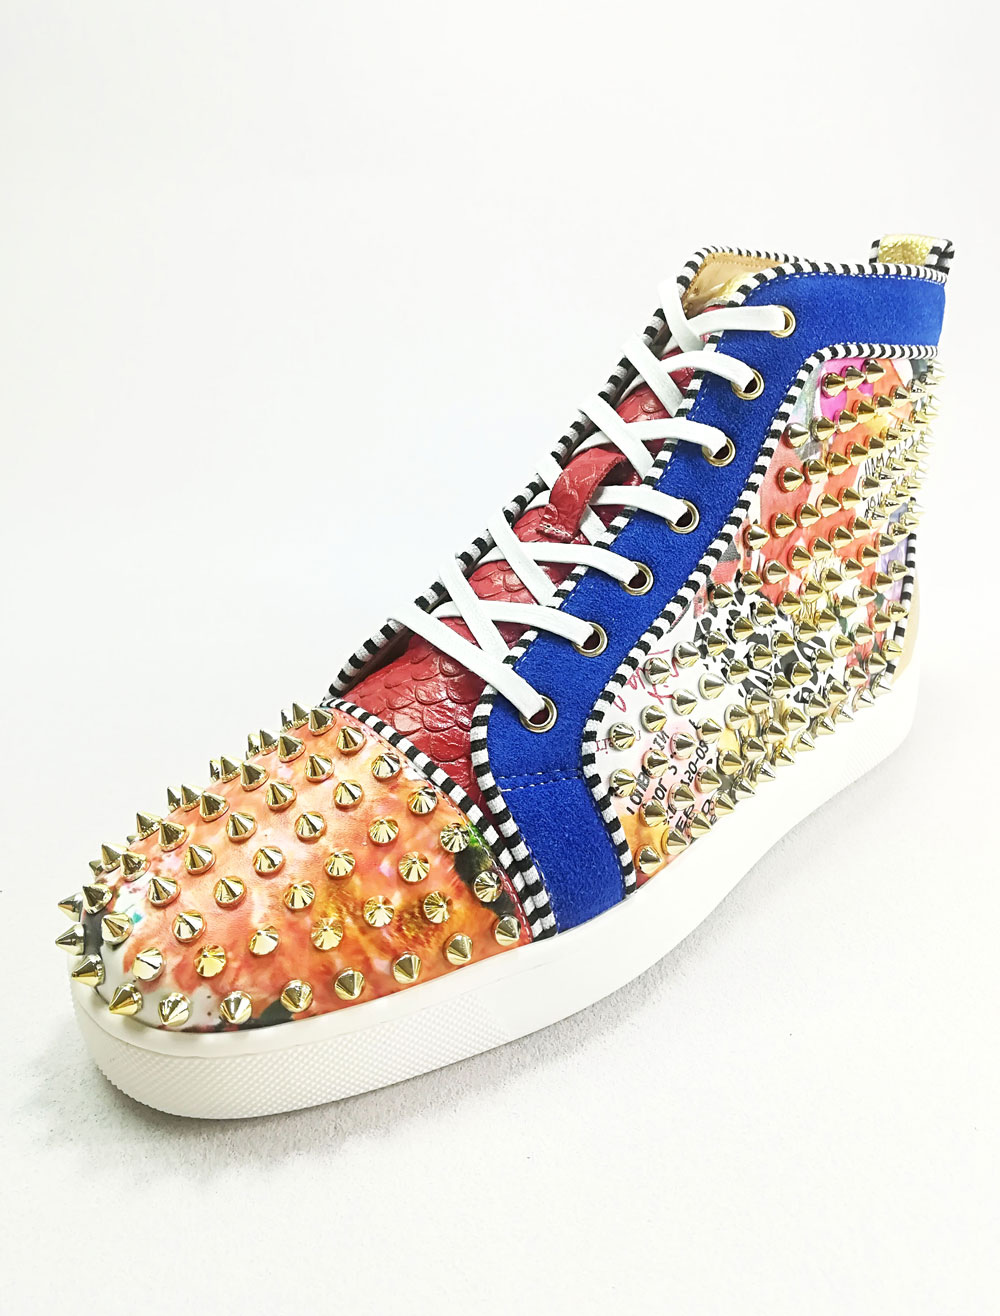 Mens Blue PU Leather High Top Sneakers Spike Shoes - Milanoo.com